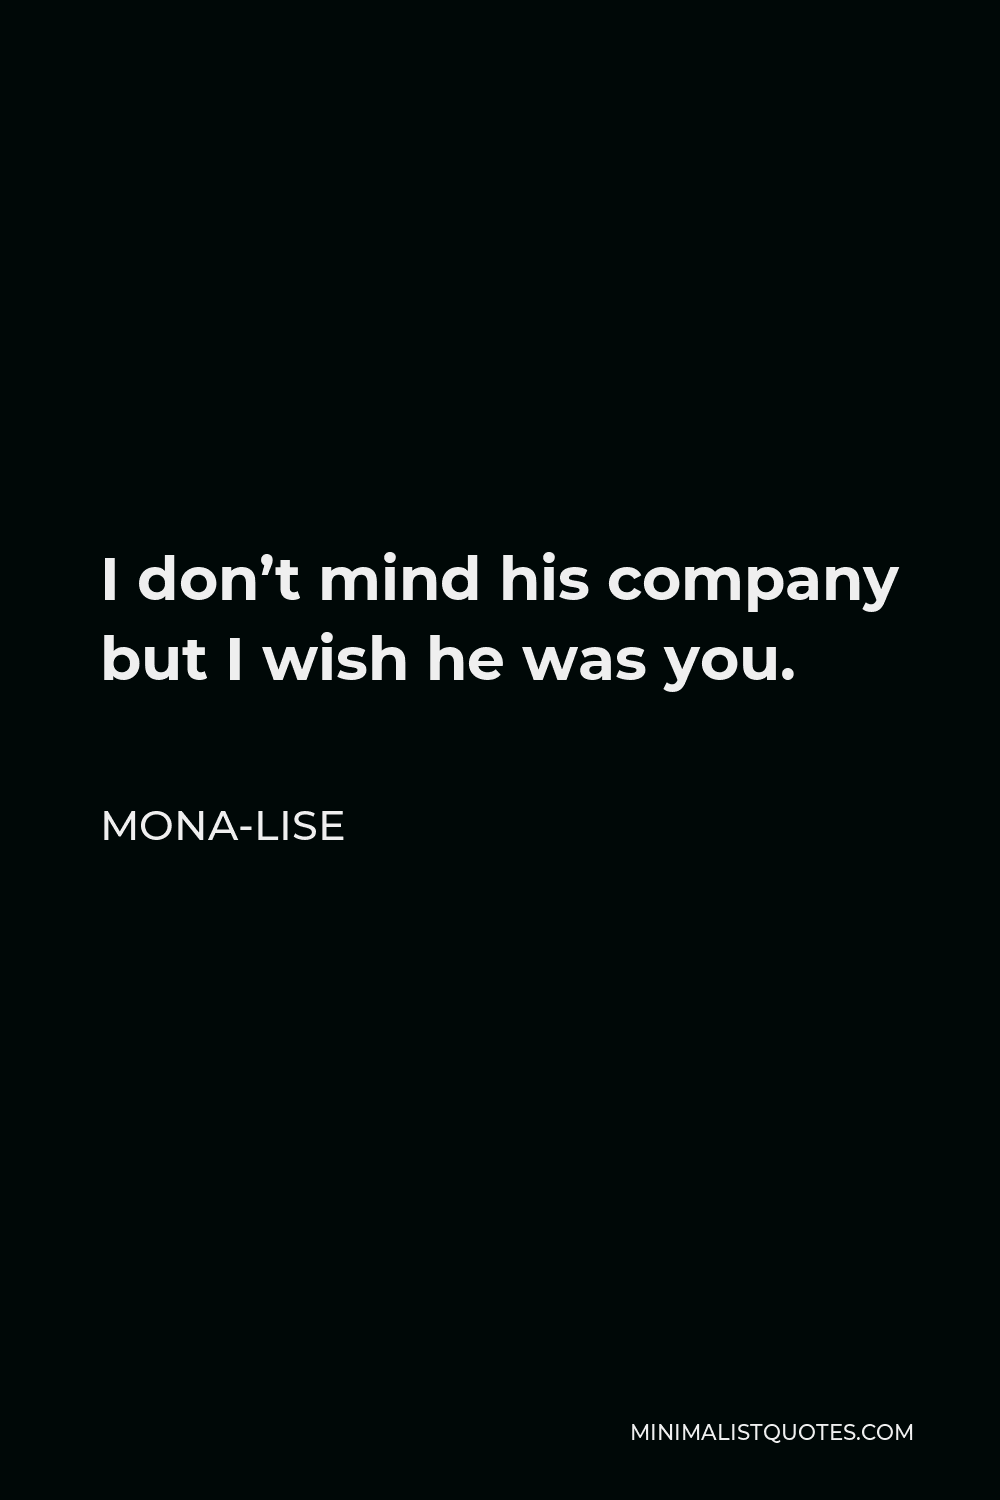 Mona-Lise Quote - I don’t mind his company but I wish he was you.